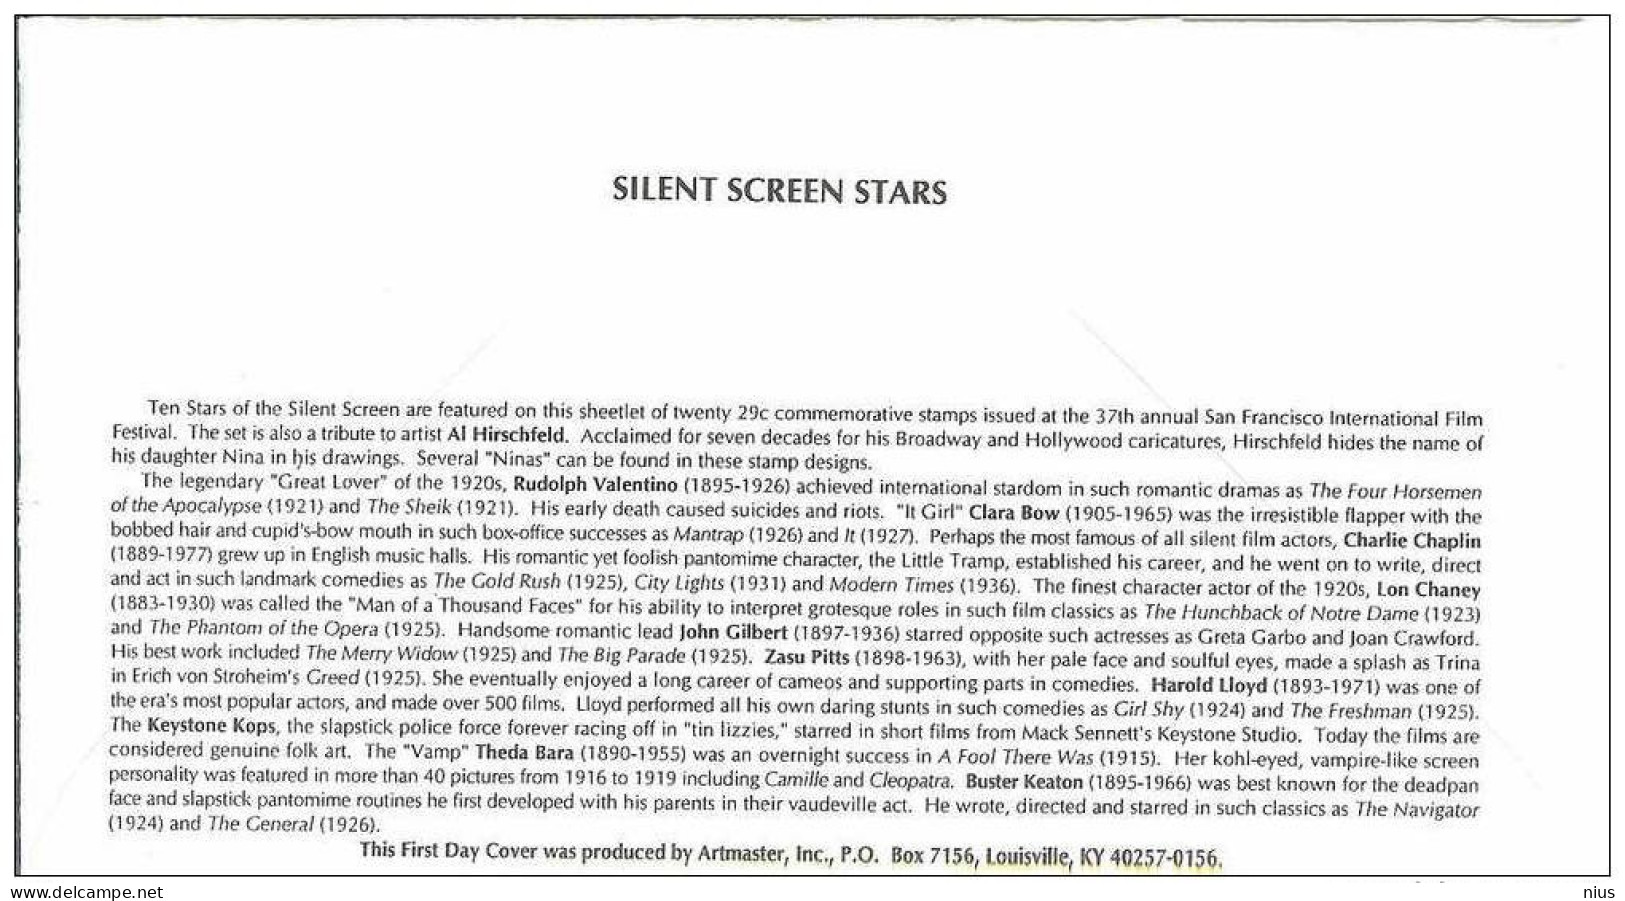 USA United States1994 FDC Actor John Gilbert Film Cinema Movie Comedy Silent Screen Comedians - 1991-2000